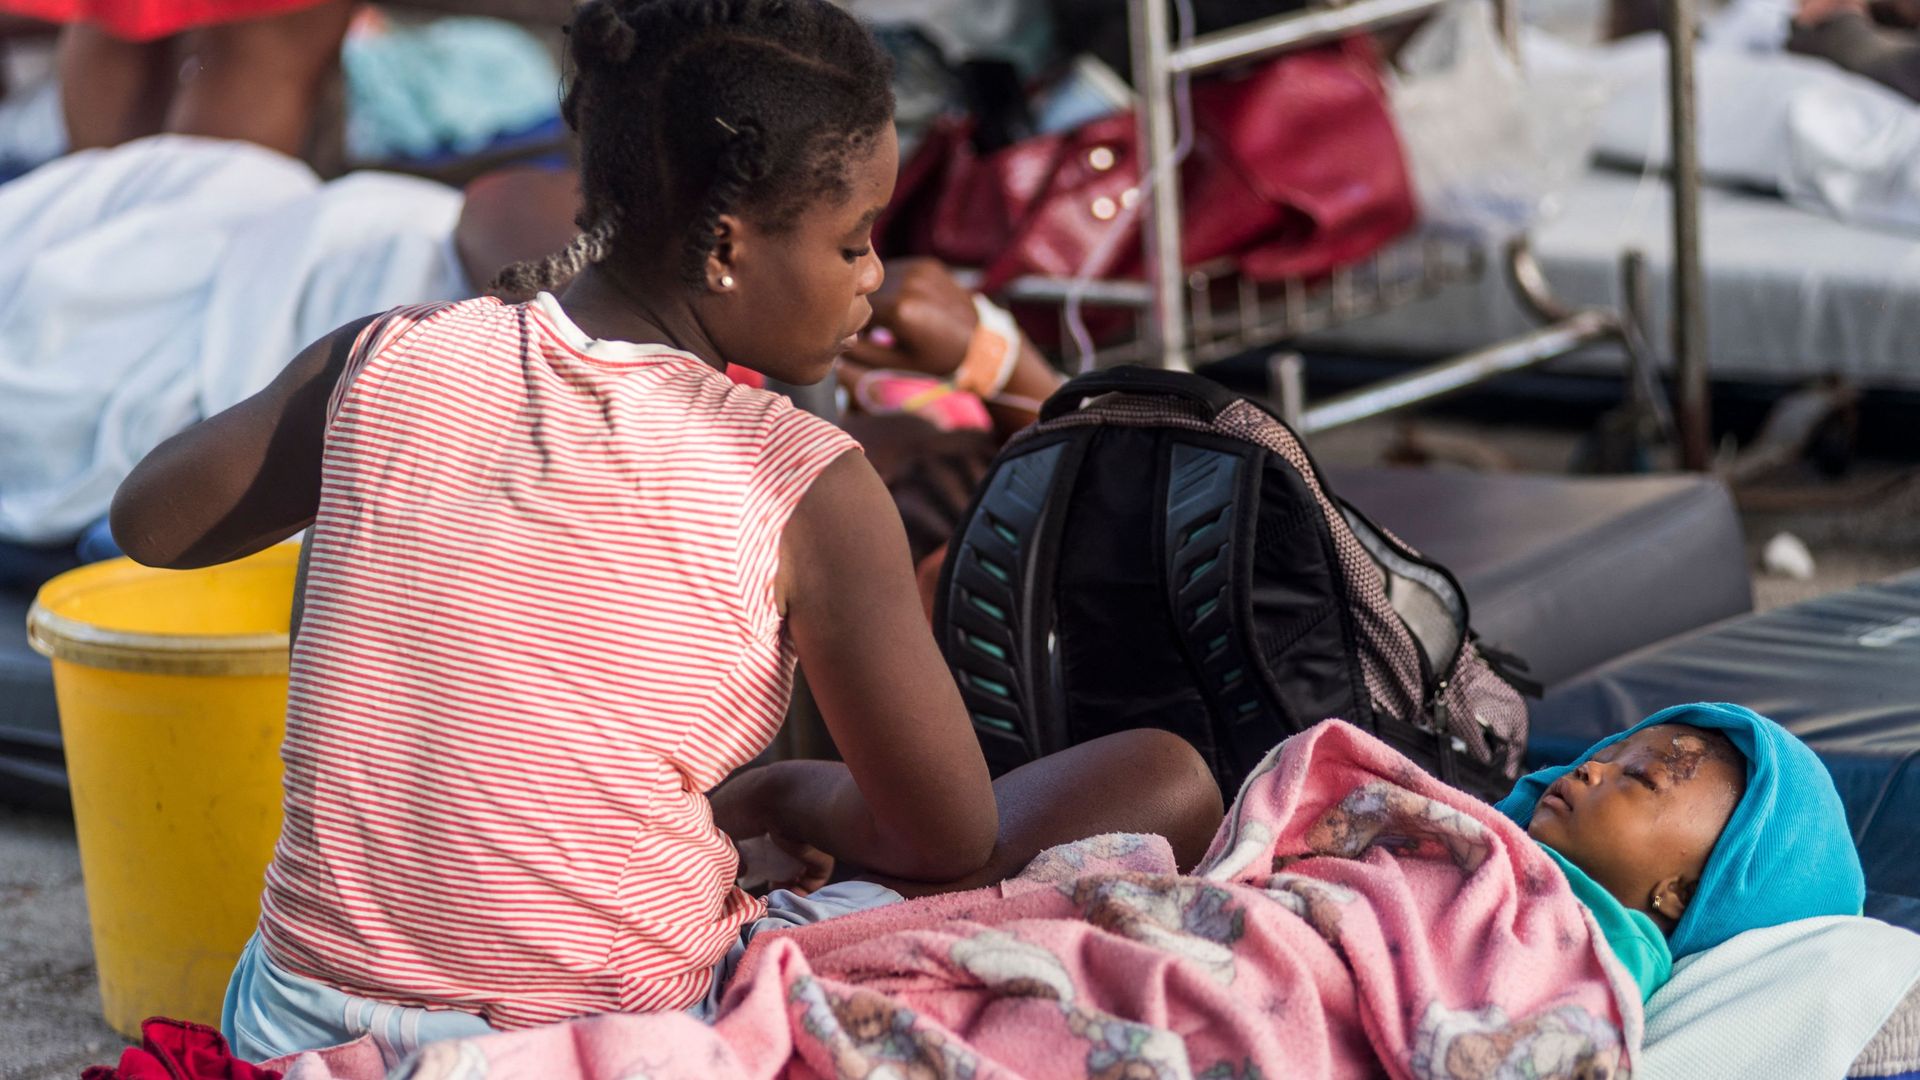 A young mother looks on at her daughter, injured as a result of the earthquake in Haiti.